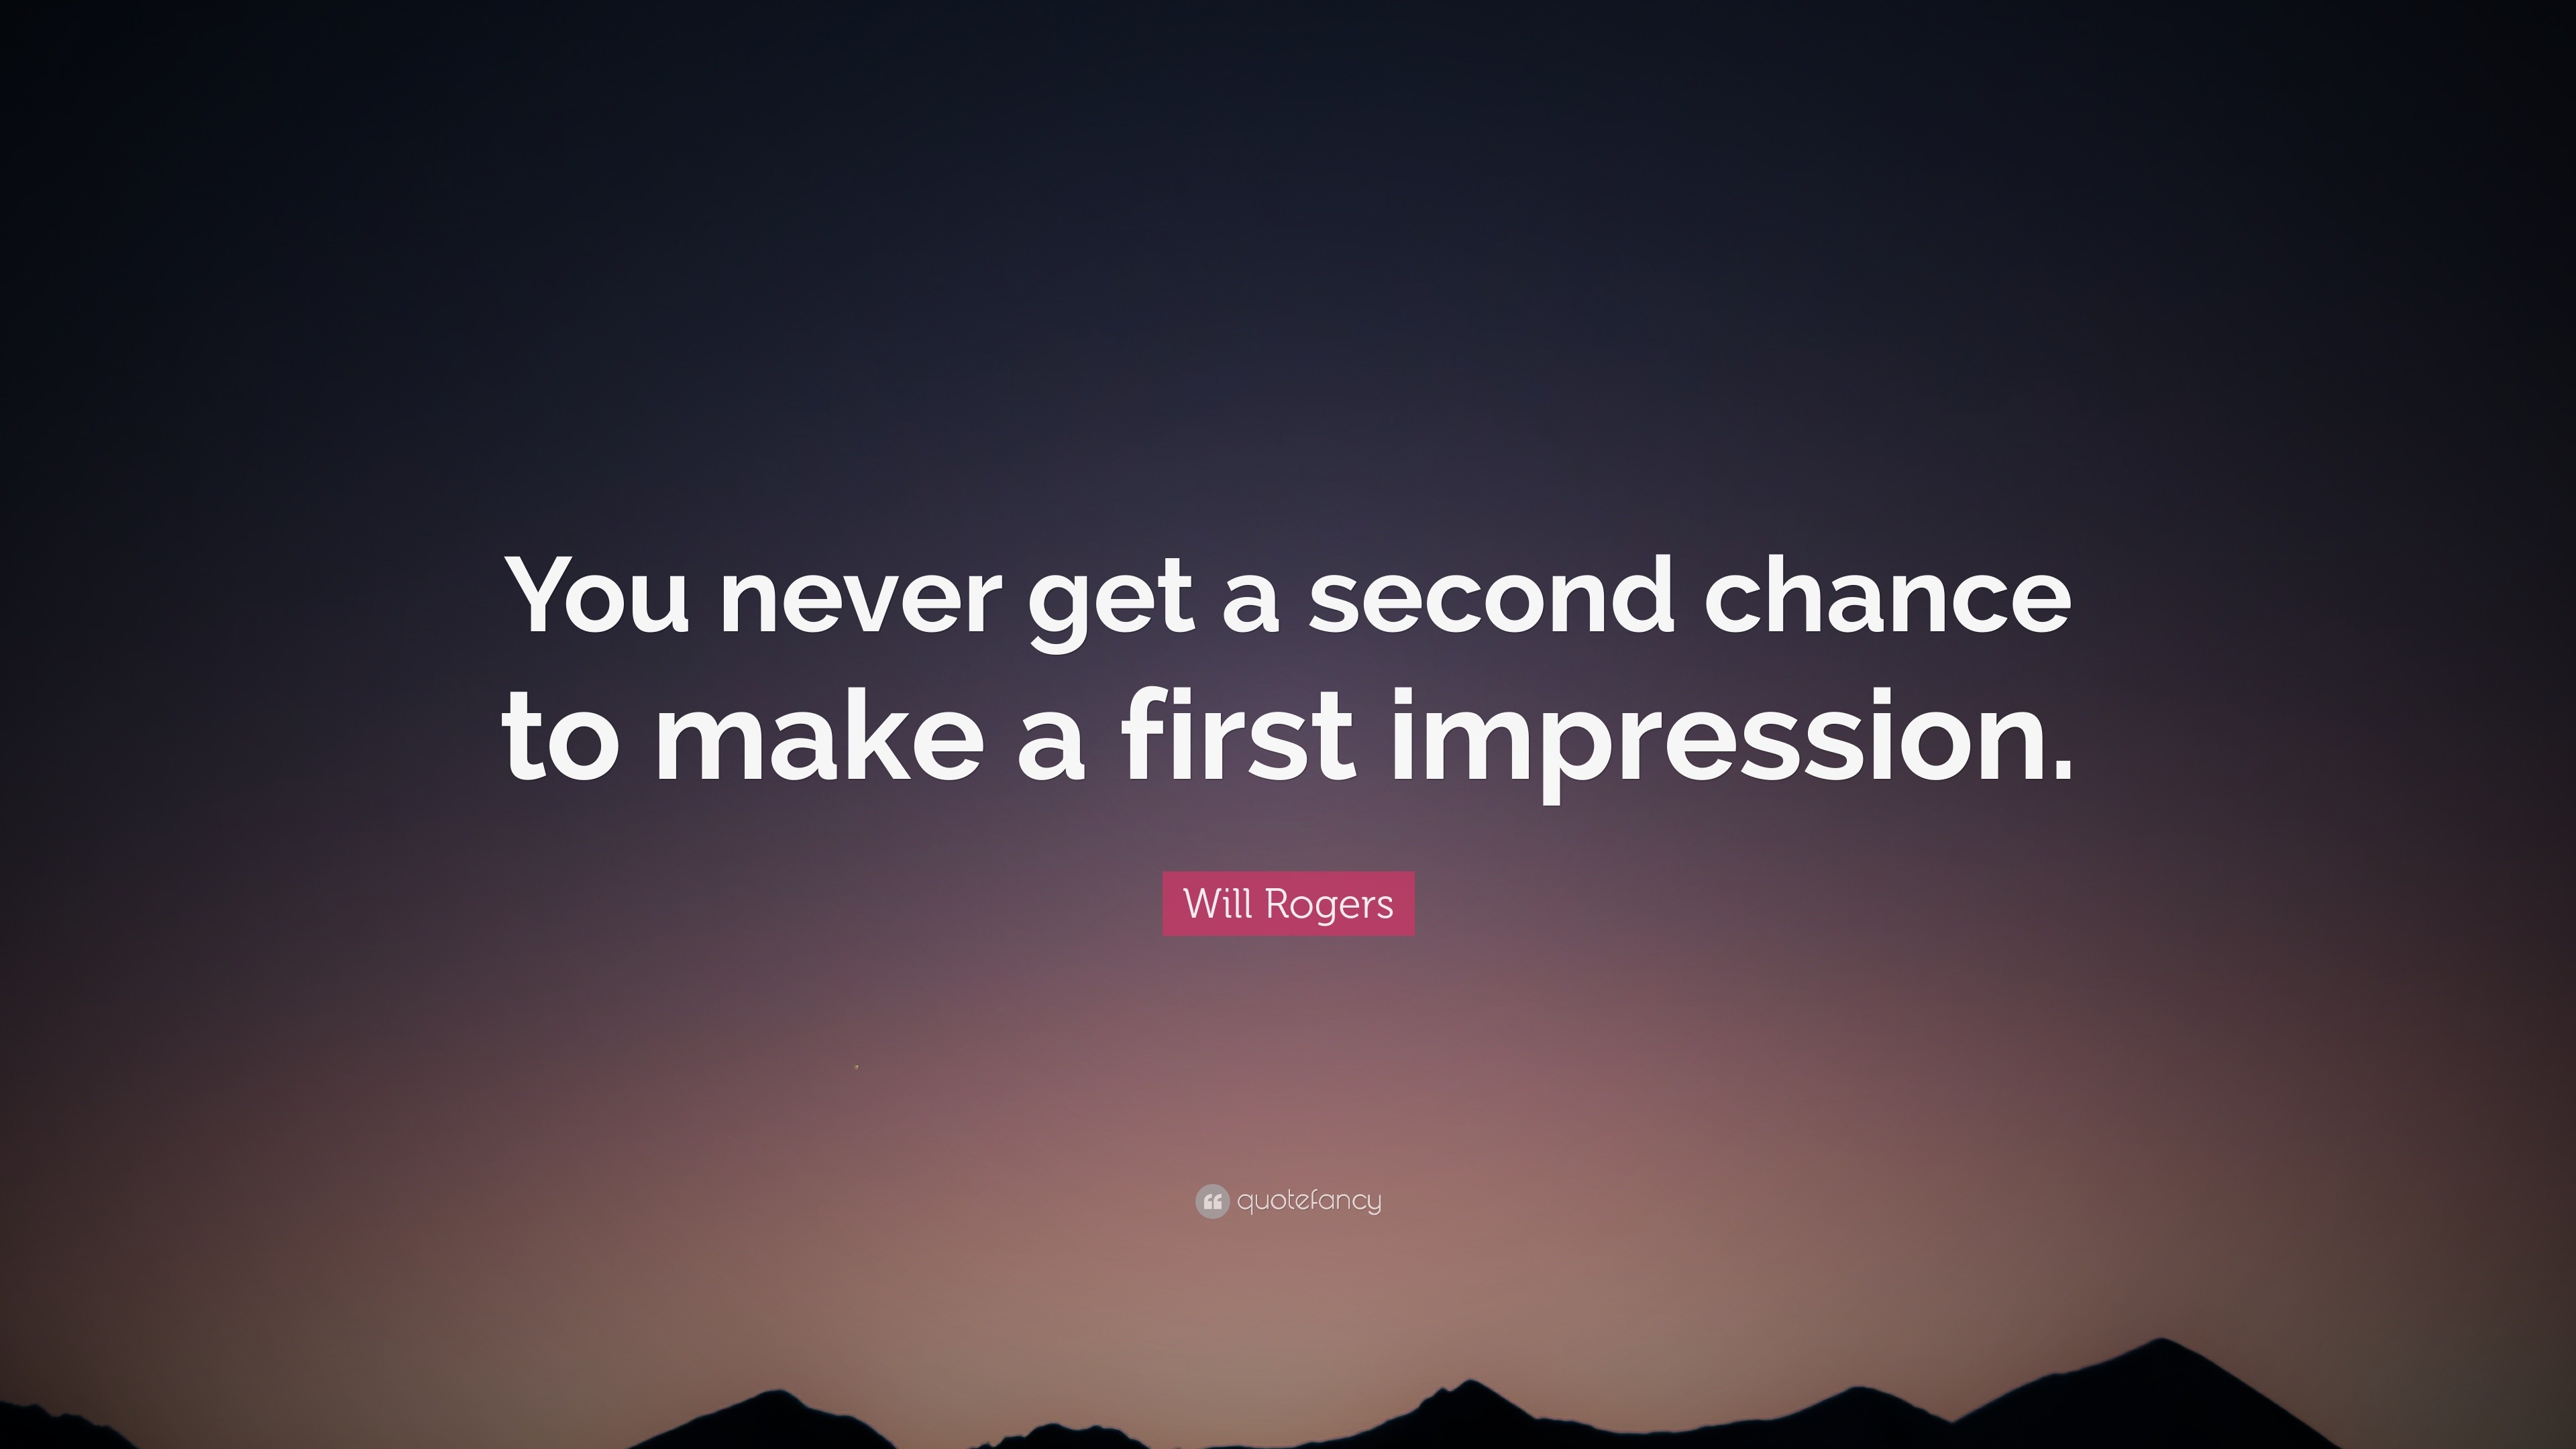 a good first impression quotes